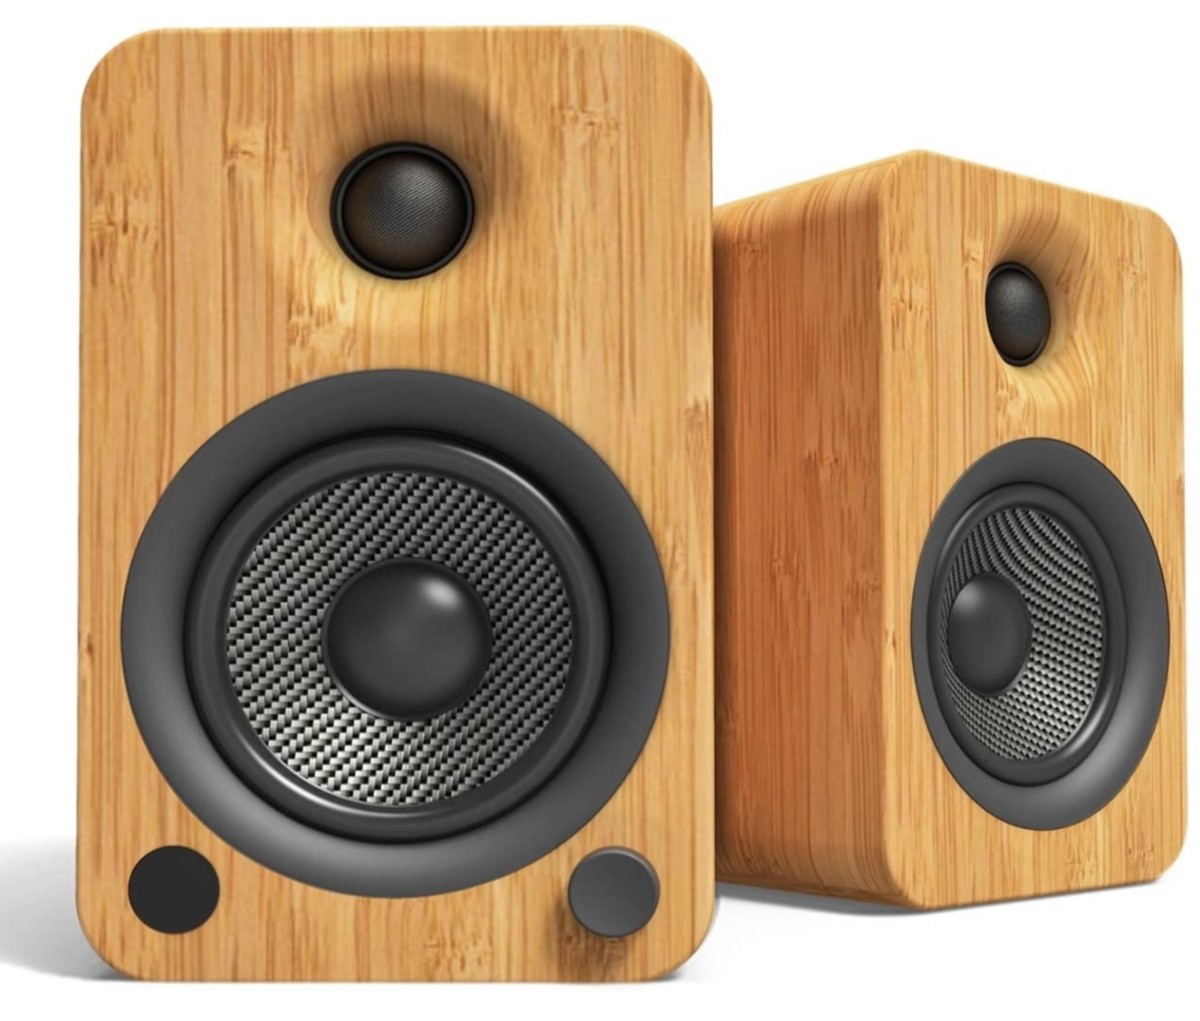 Kanto’s YU6 Powered Speakers Have All The Ways To Play Your Music